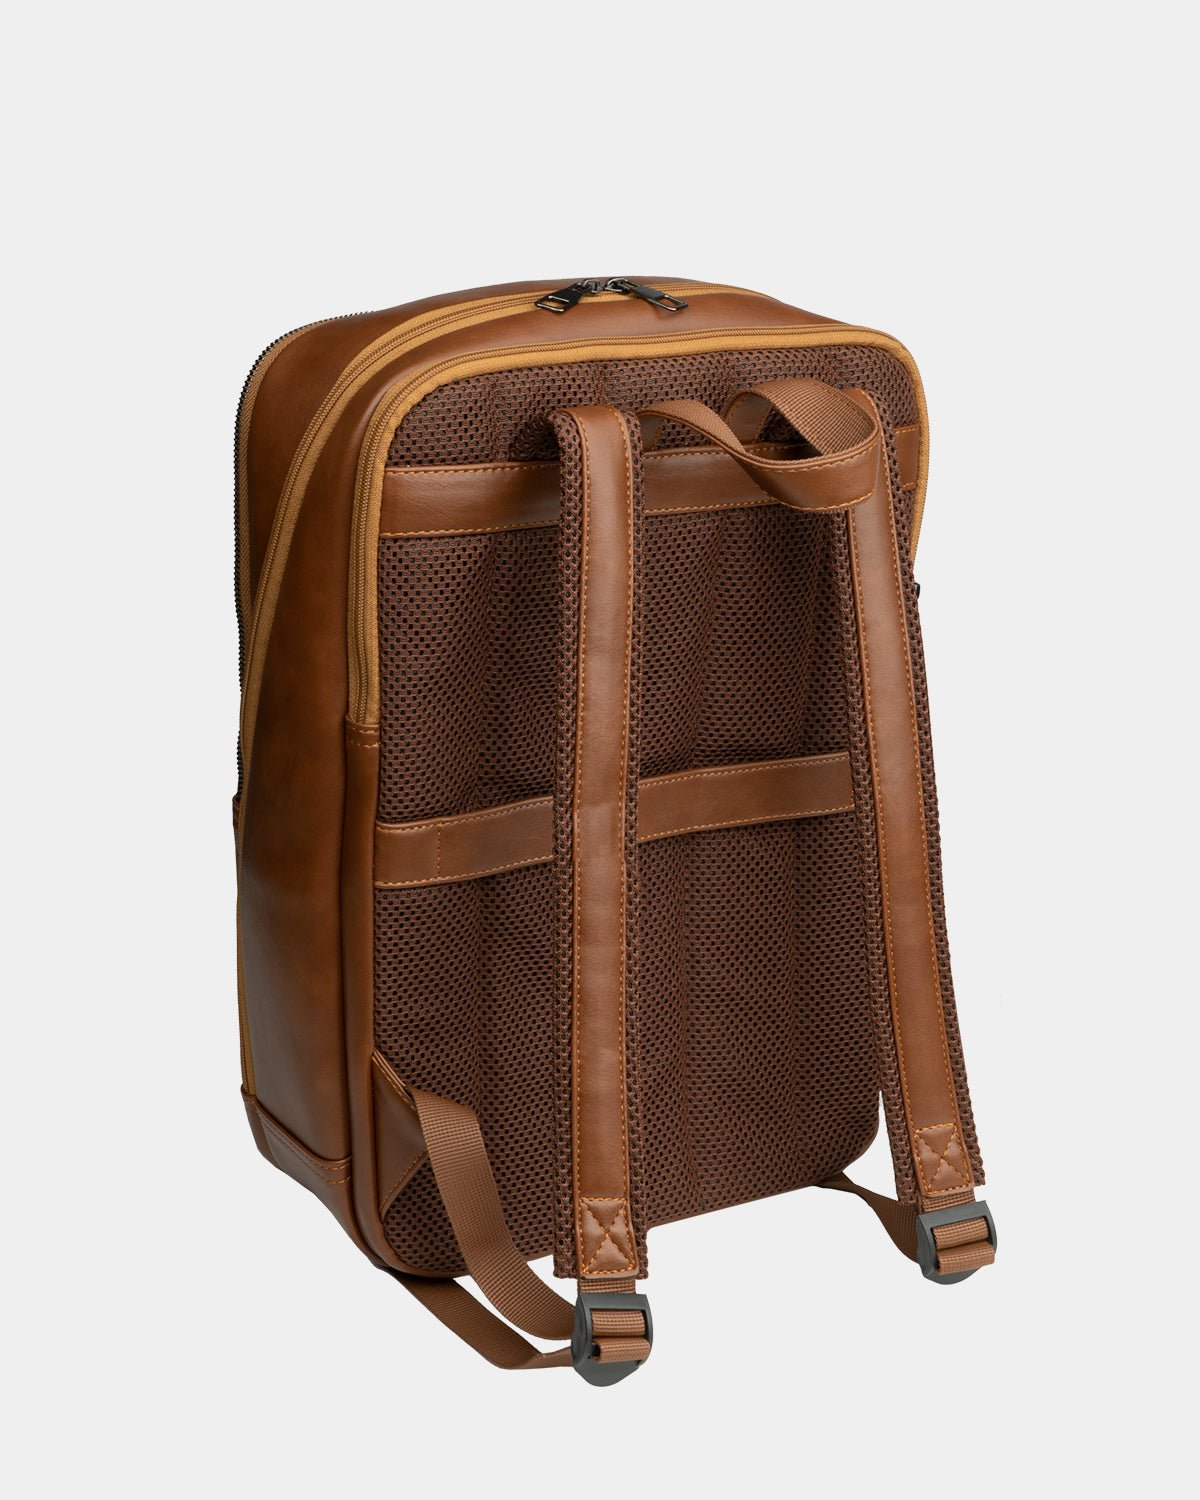 Laptop Backpack, Full Leather, 3 Color Options  99percenthandmade   